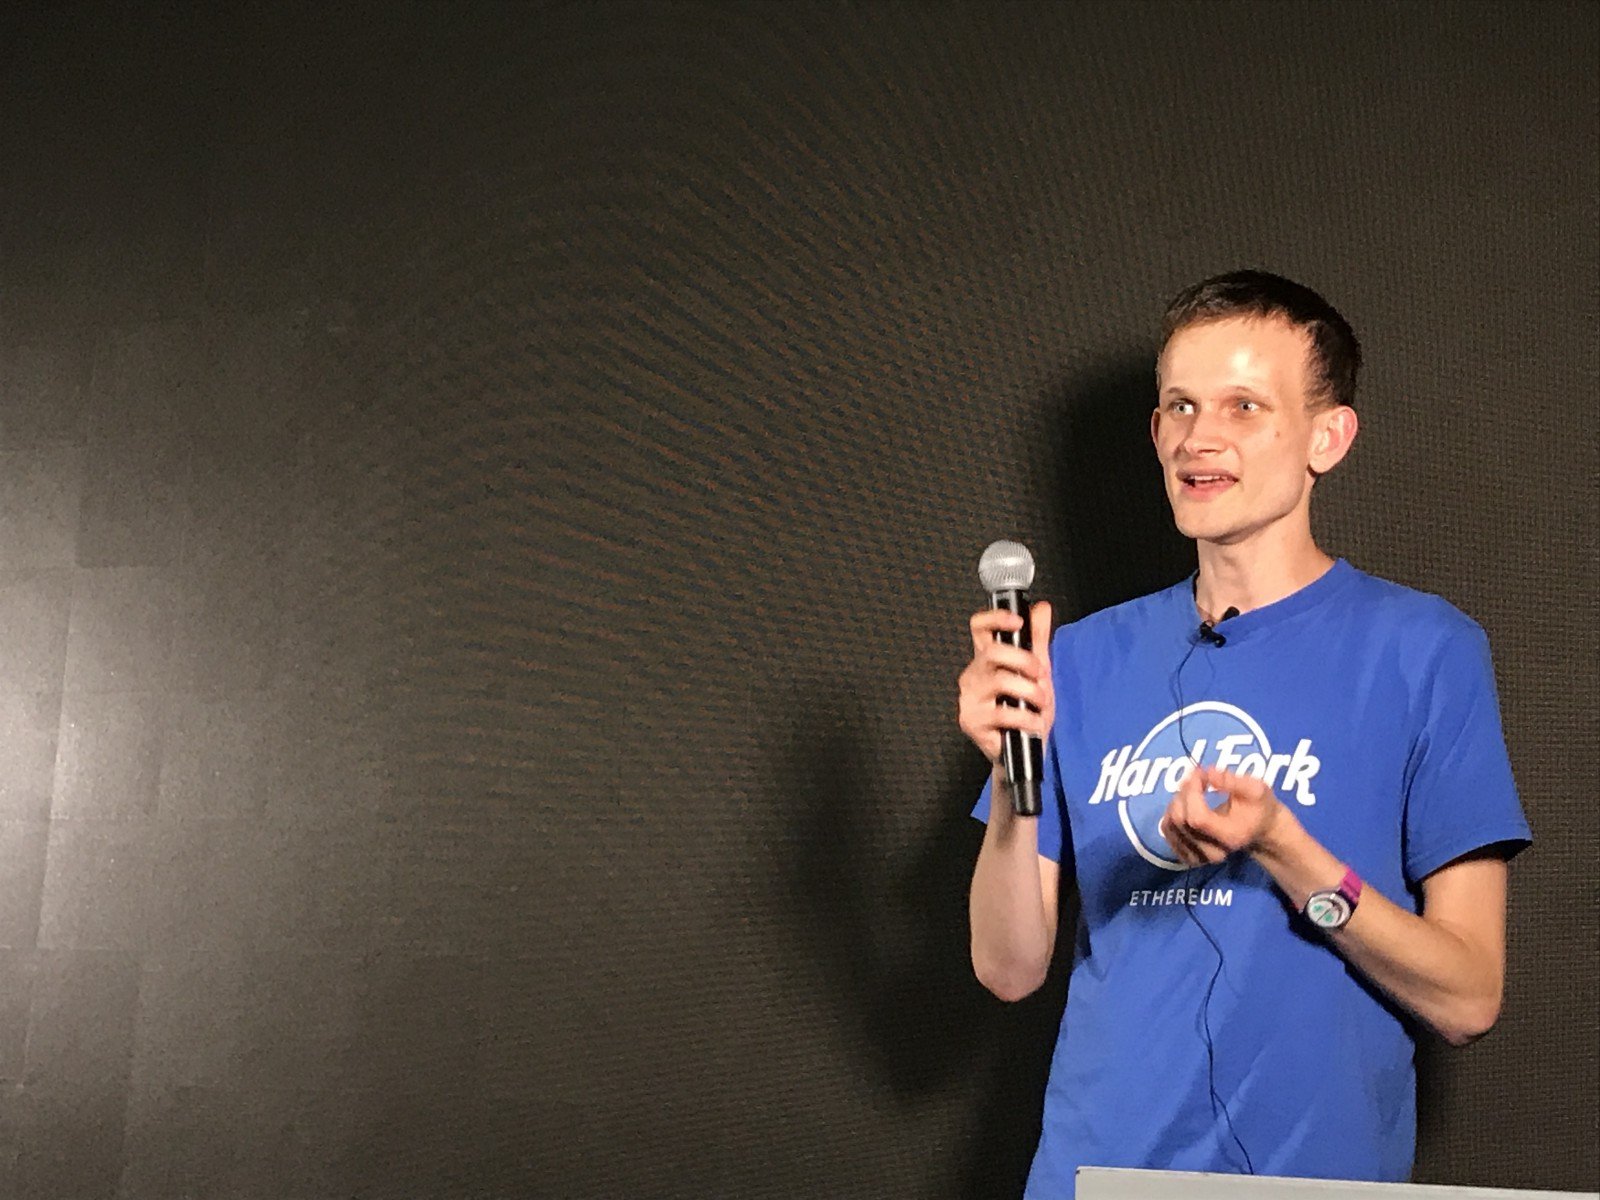 Vitalik Buterin: “There’s Too Much Emphasis on Bitcoin ETF”